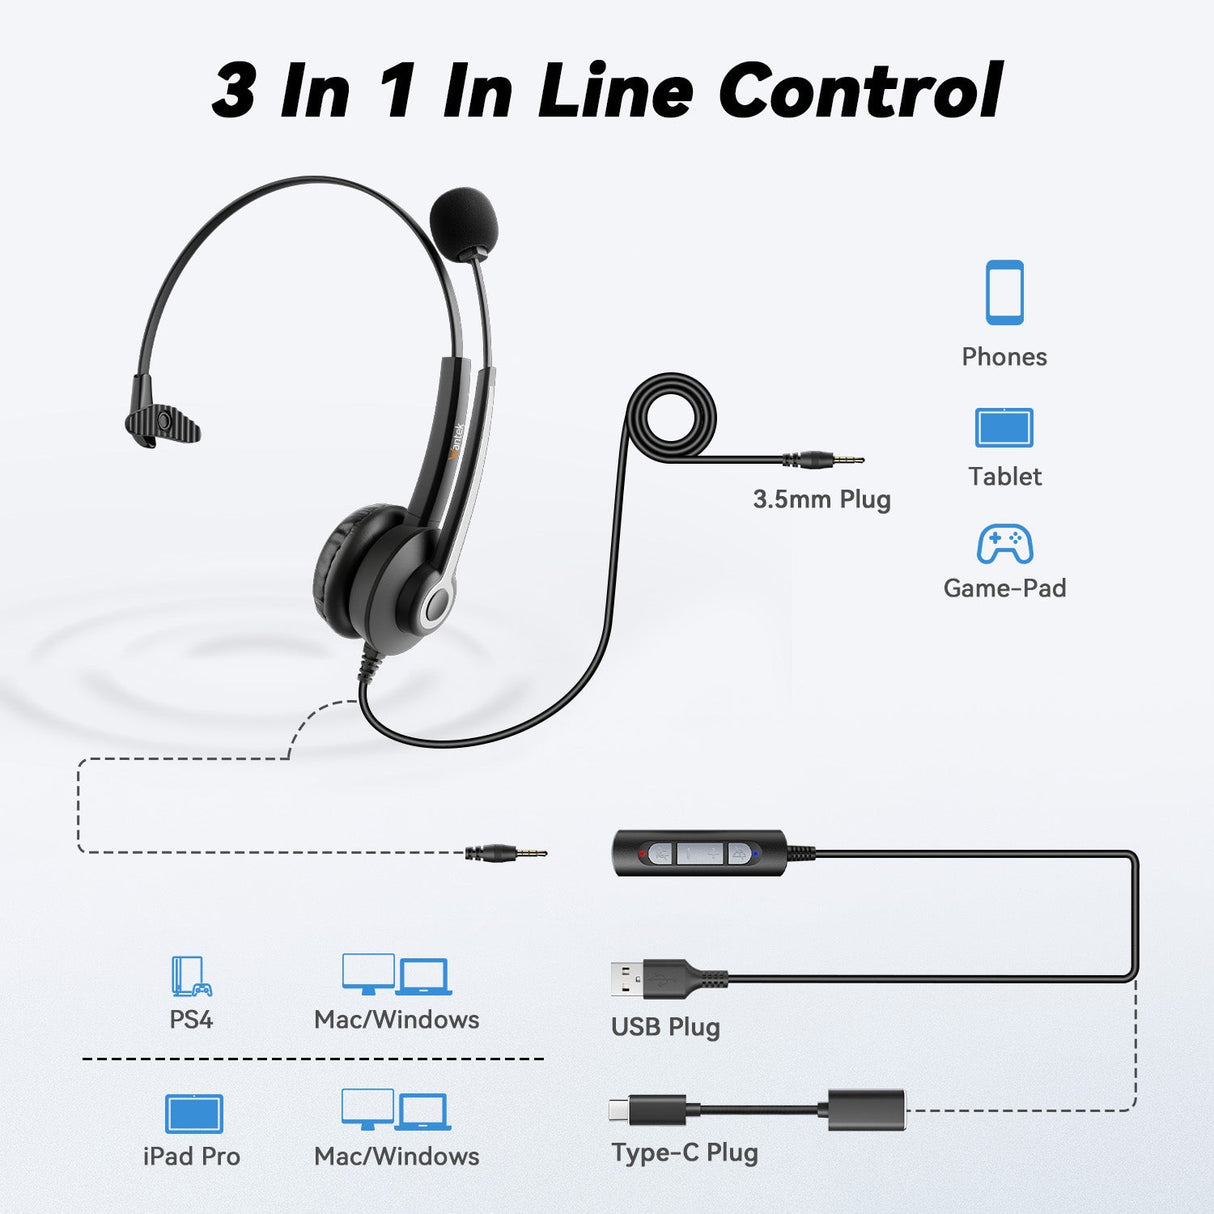 Wantek® h681 mono 3-in-1 USB headset for phones - iwantekWantek® h681 mono 3-in-1 USB headset for phones